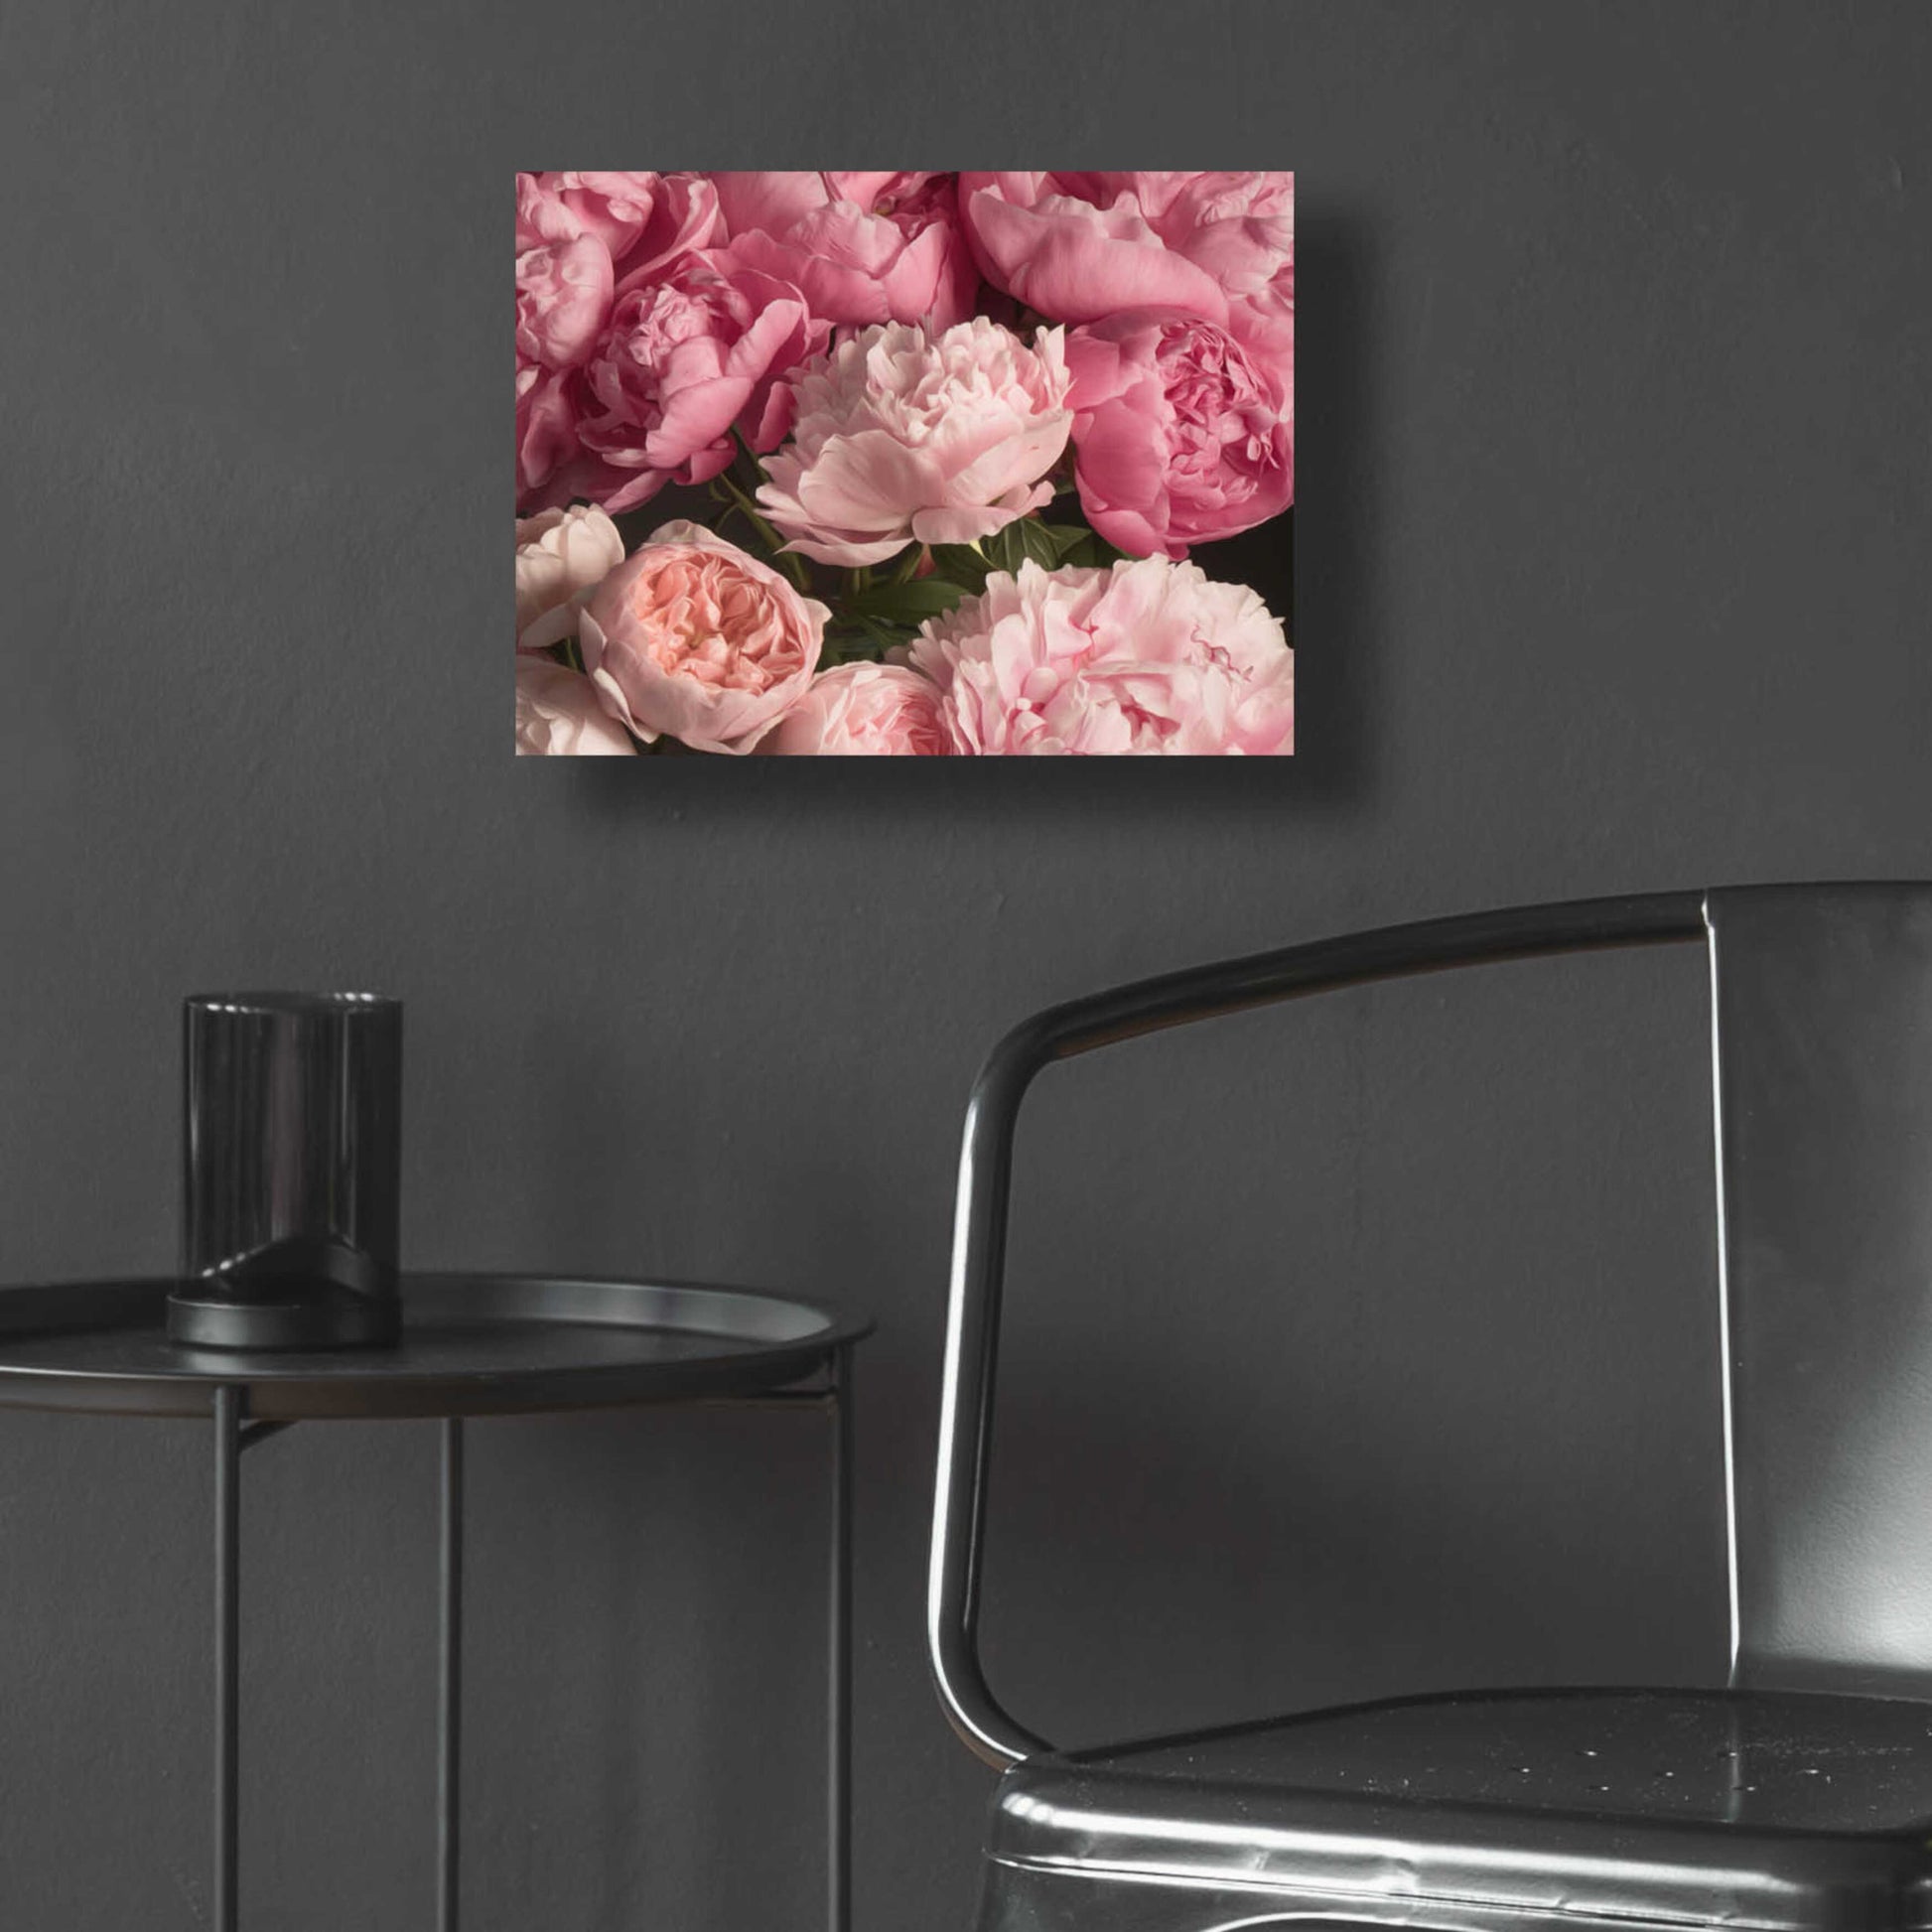 Epic Art 'Pink Petals' by Leah McLean, Acrylic Glass Wall Art,16x12